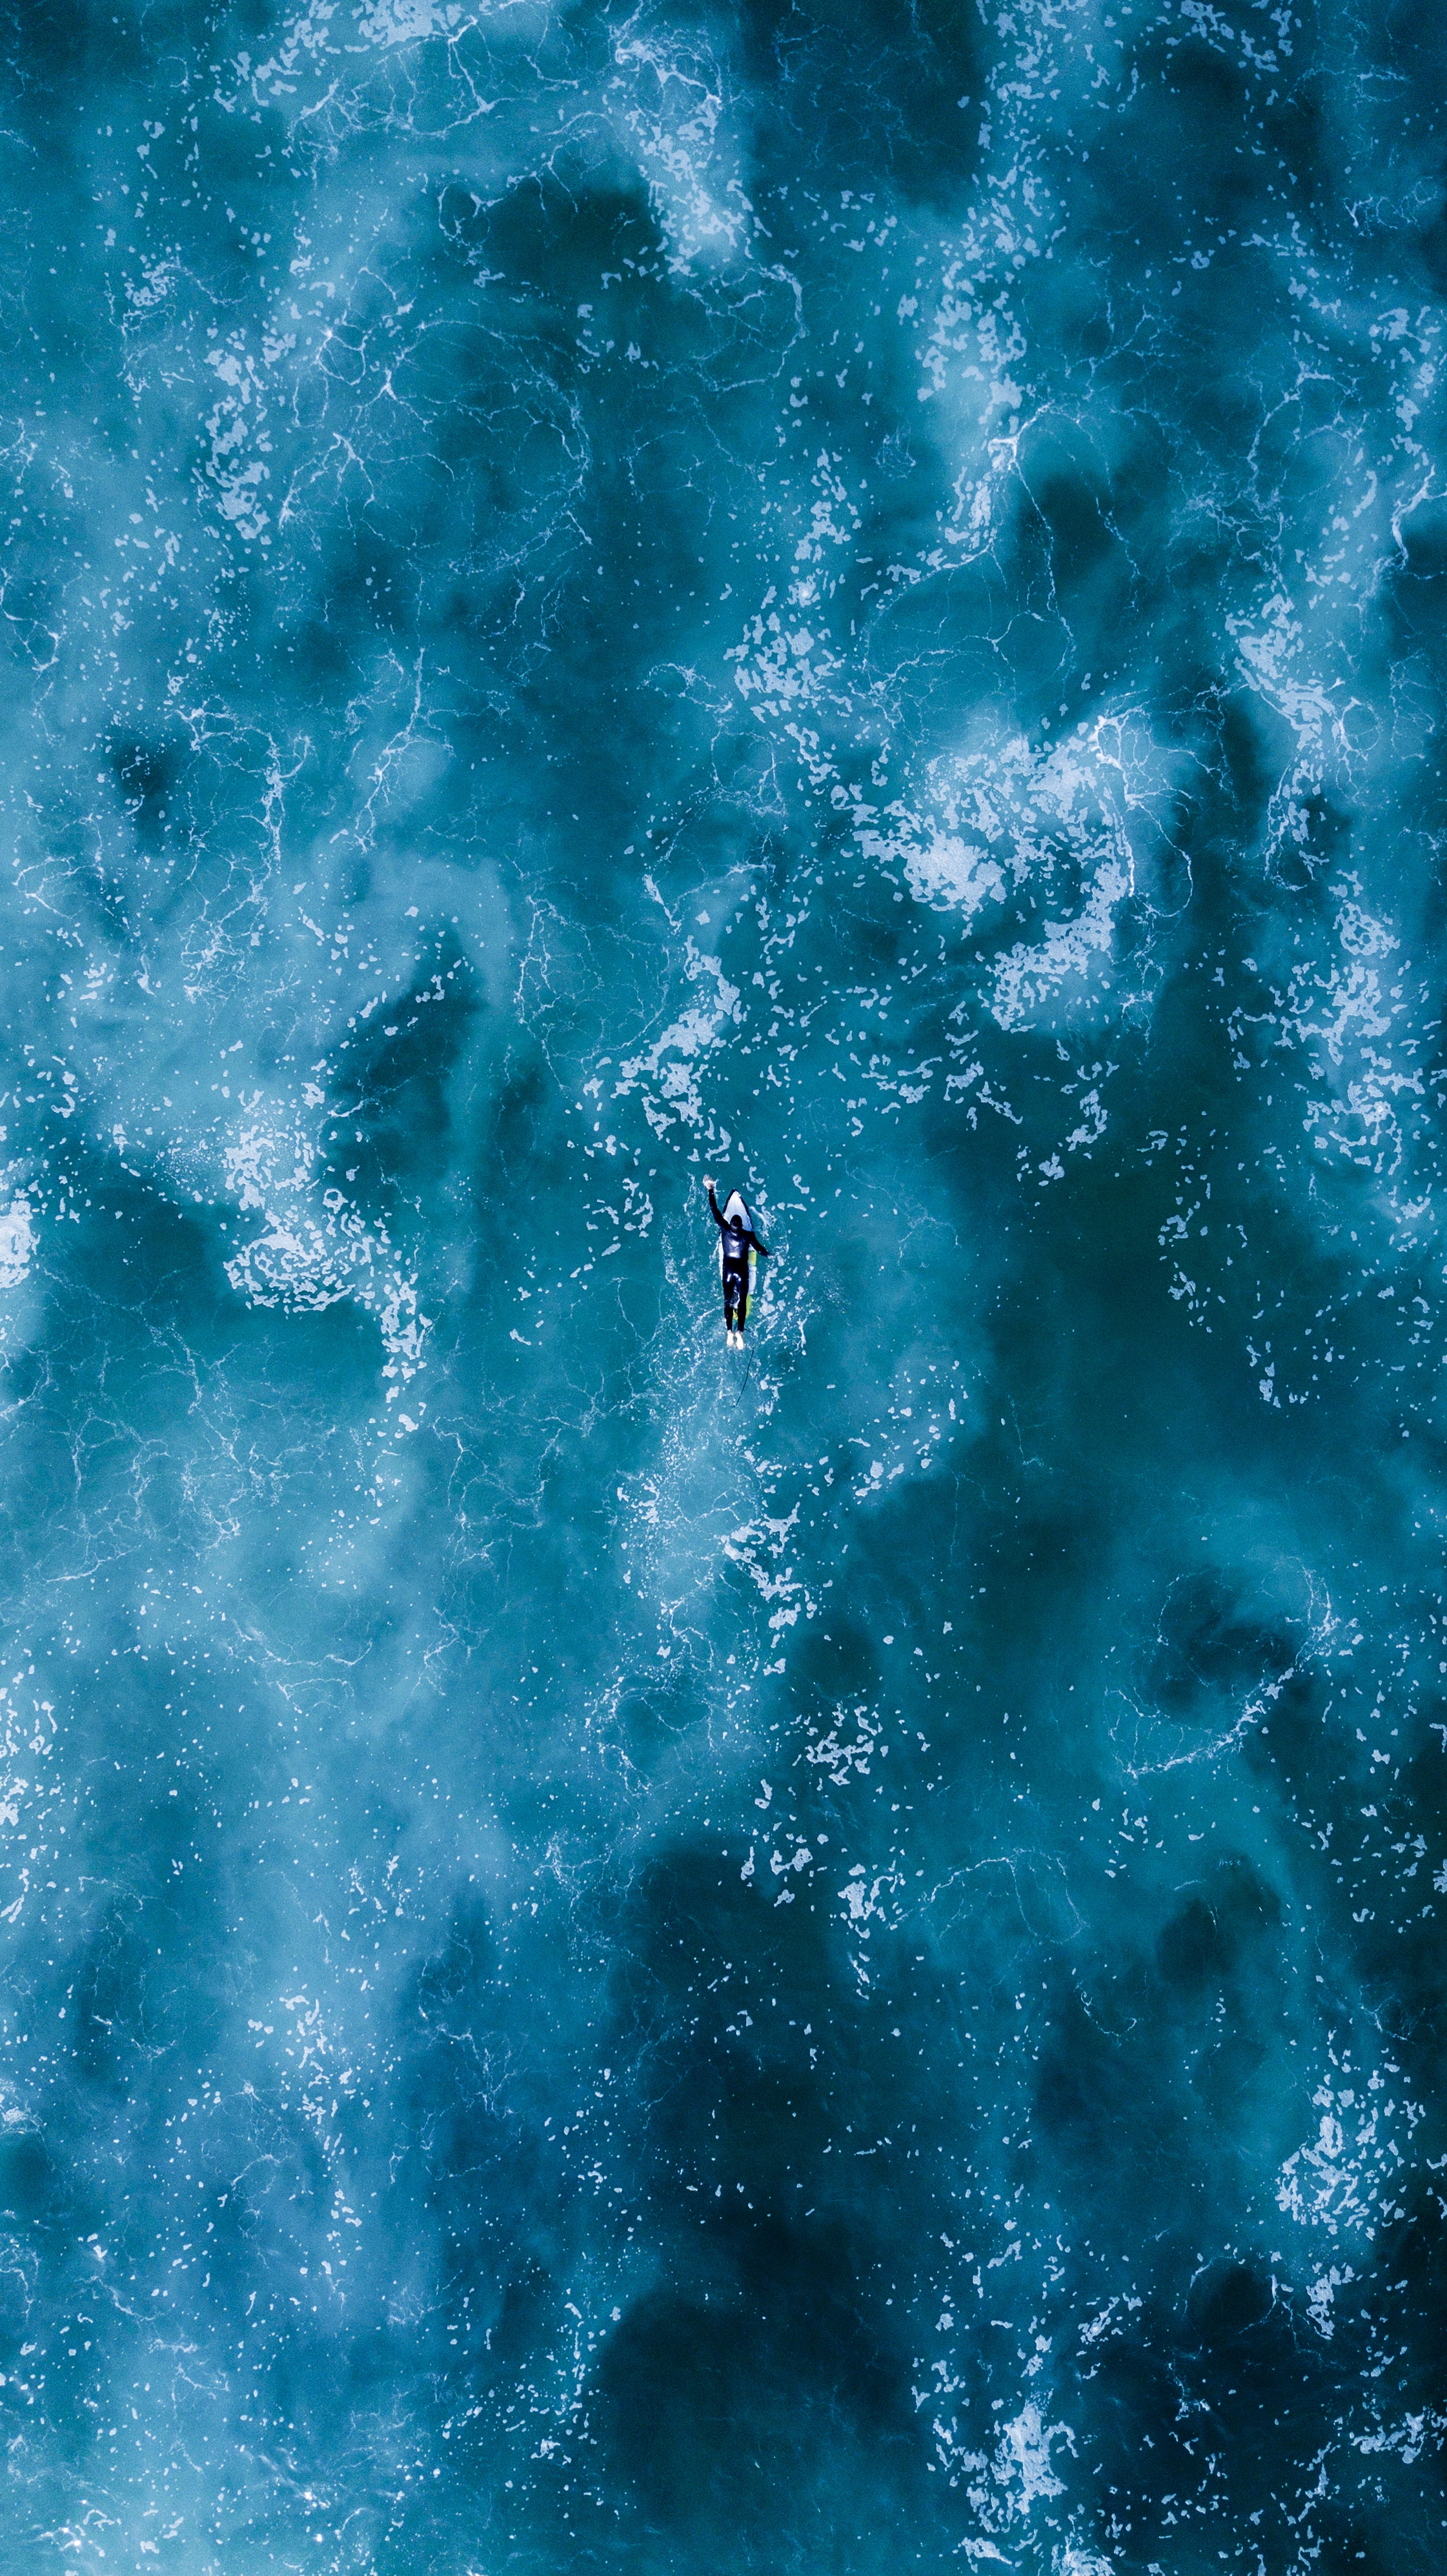 Wallpaper Full HD nature, waves, serfing, view from above, ocean